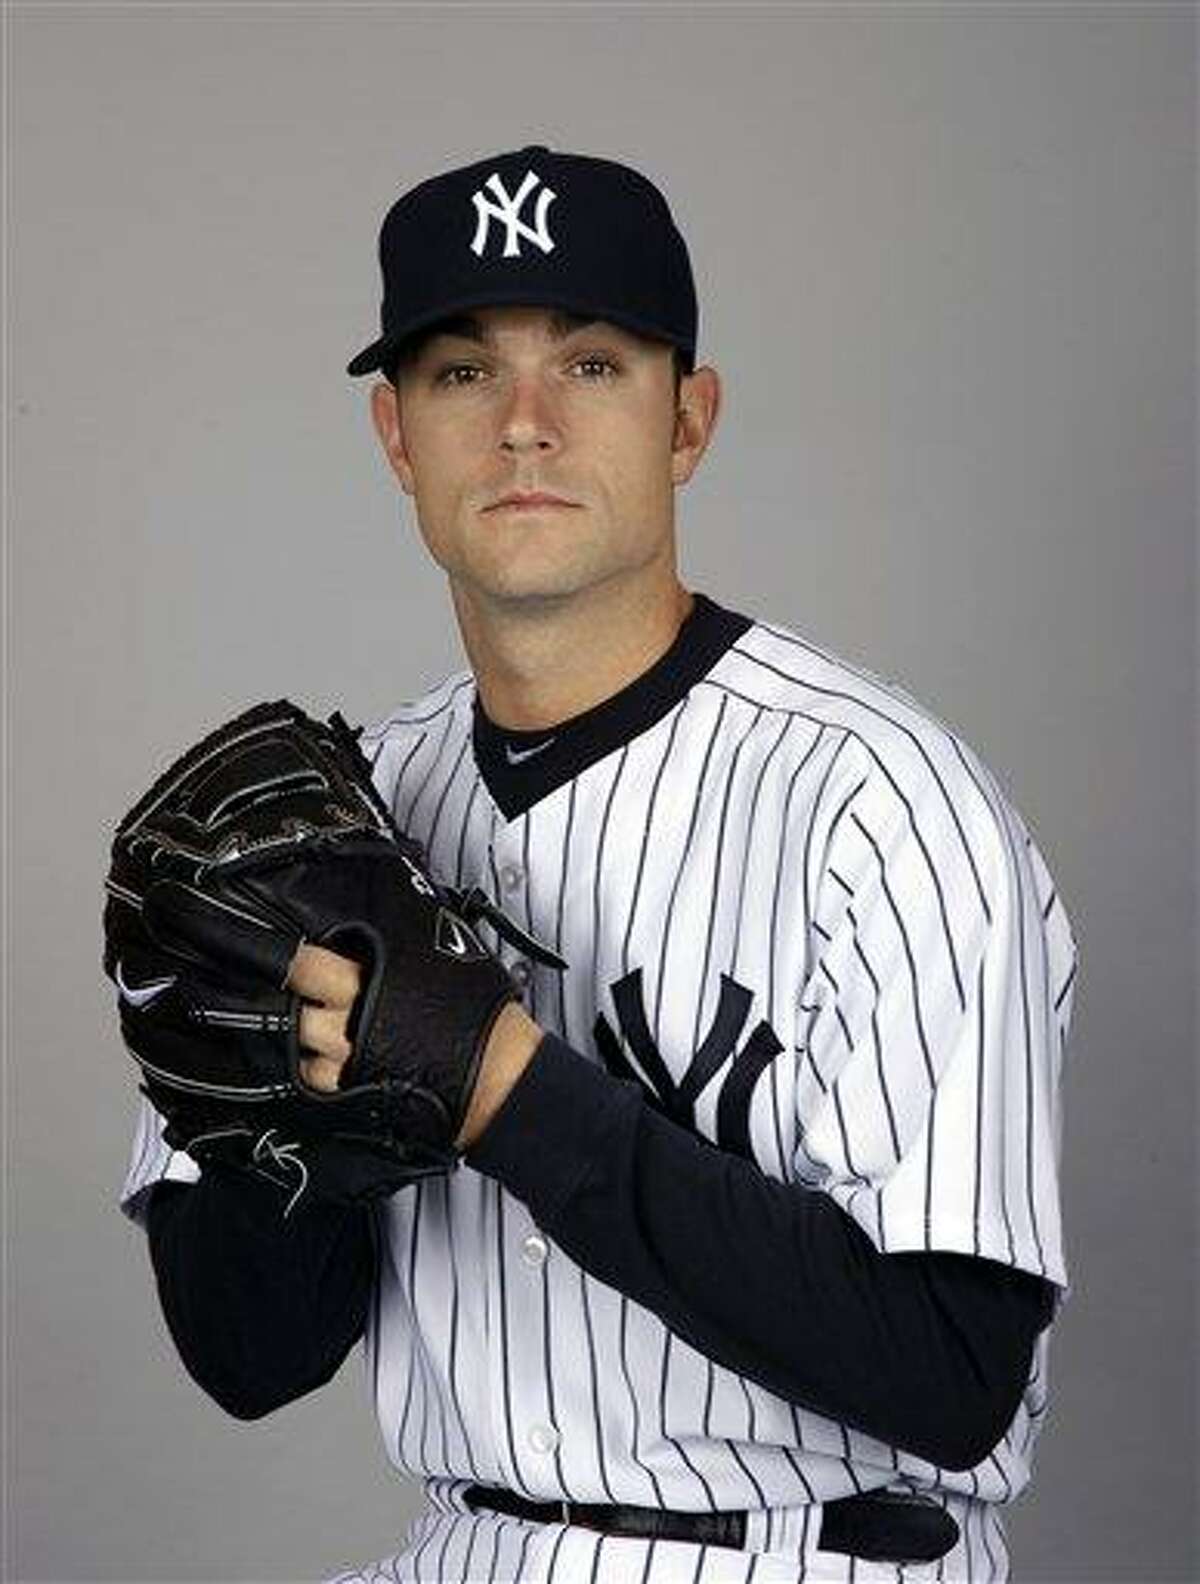 FILE - This Feb. 27, 2012 file photo shows New York Yankees baseball player David Robertson. The Yankees took their first misstep of 2012 when All-Star setup man David Robertson sprained his right foot when he fell down stairs while moving boxes in his spring training home. An initial X-ray was negative, and the reliever was taken a hospital for an MRI Thursday, March 8, 2012. (AP Photo/Matt Slocum, File)